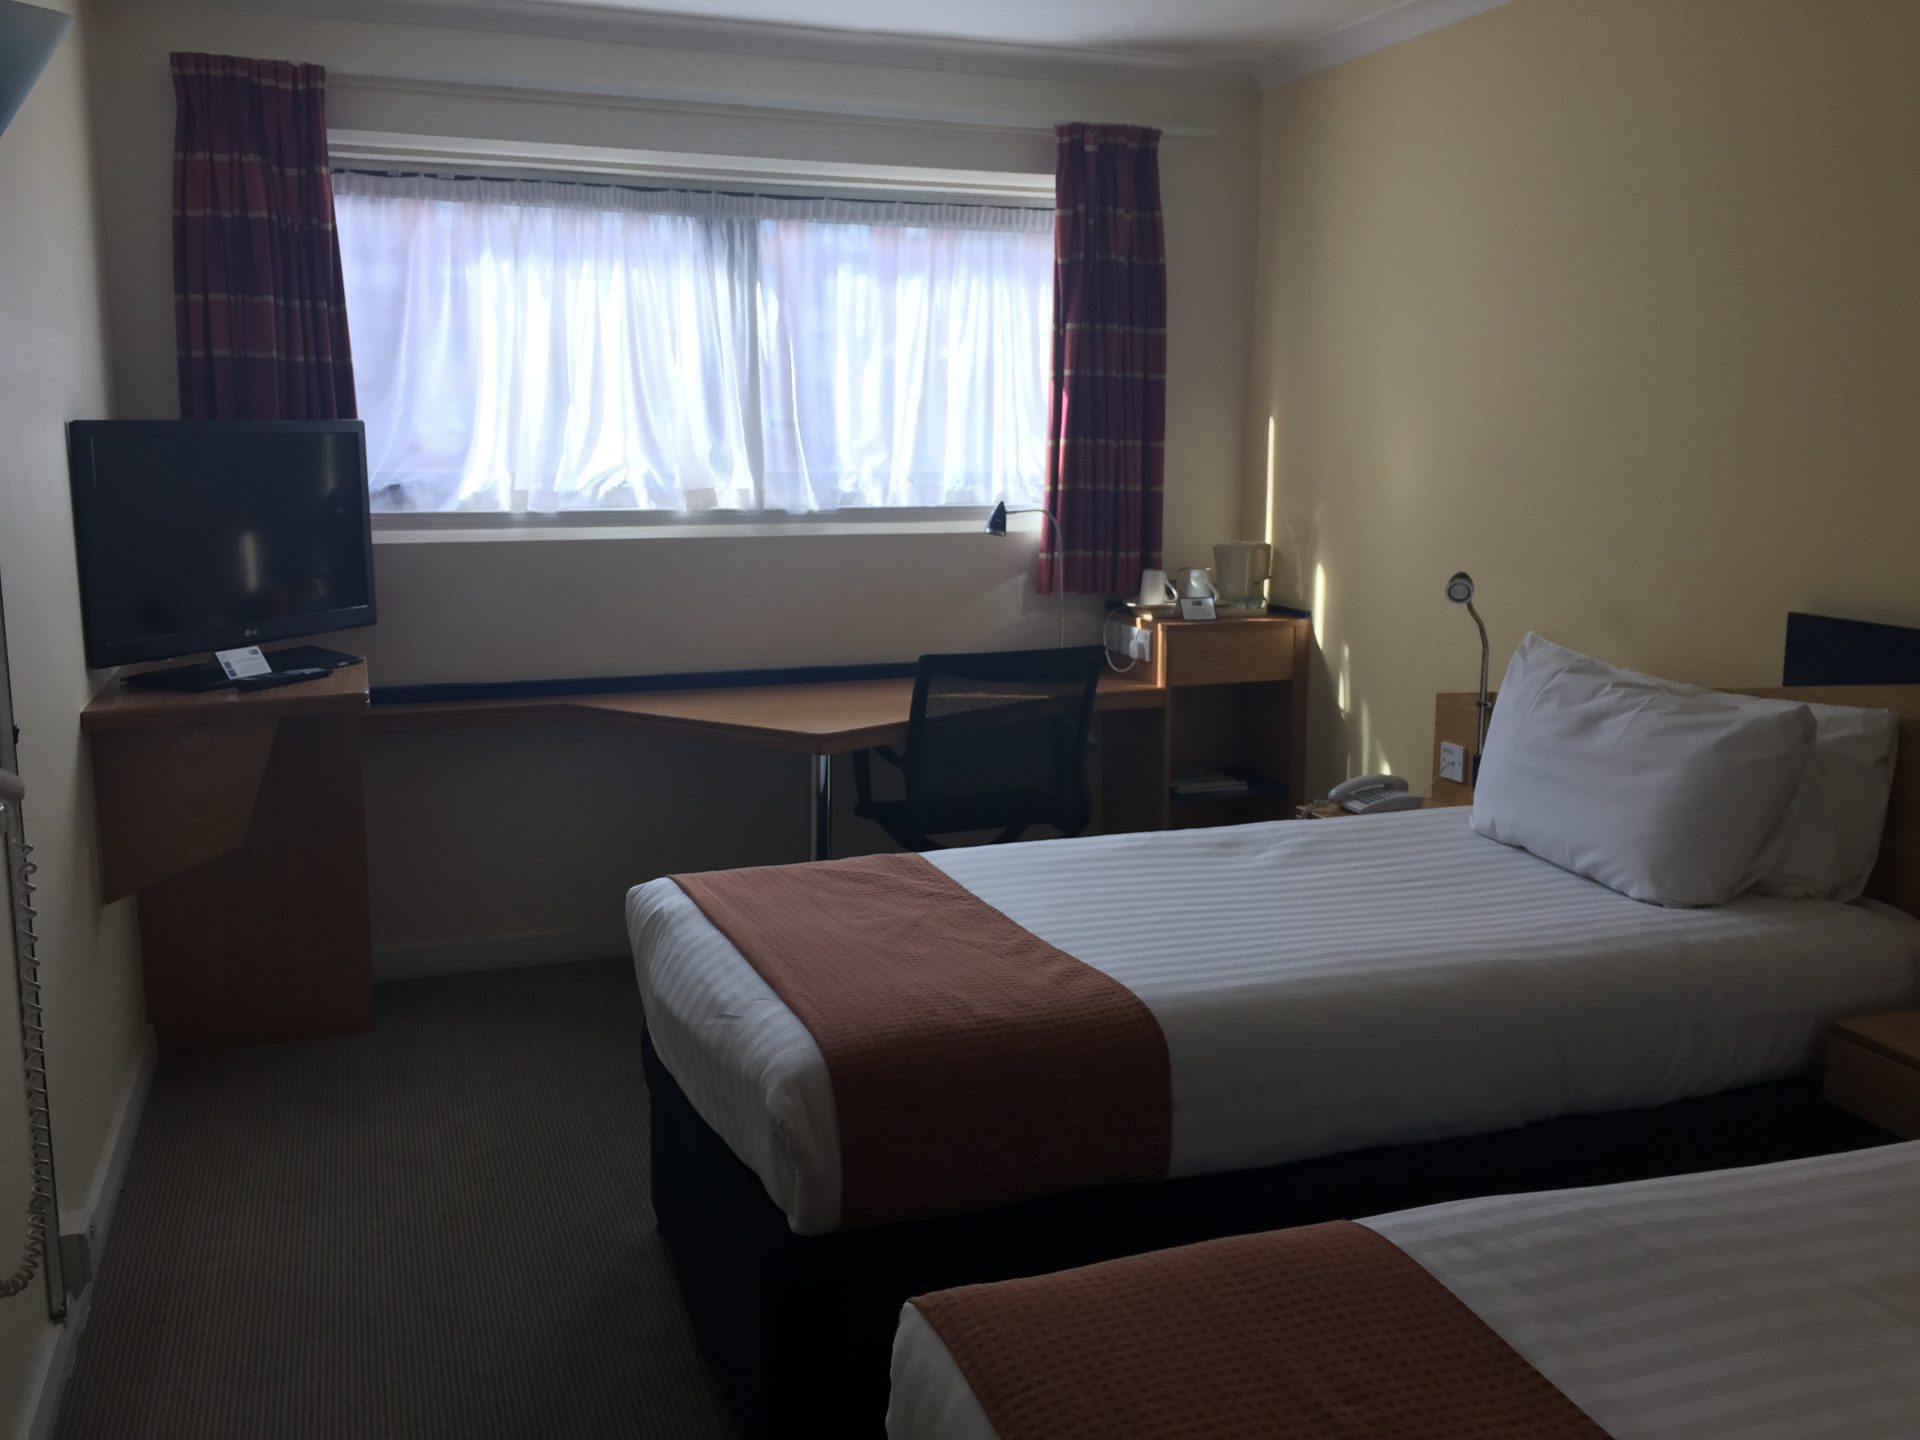 holiday inn express glasgow city centre riverside room - Holiday Inn Express Glasgow City Centre Riverside review